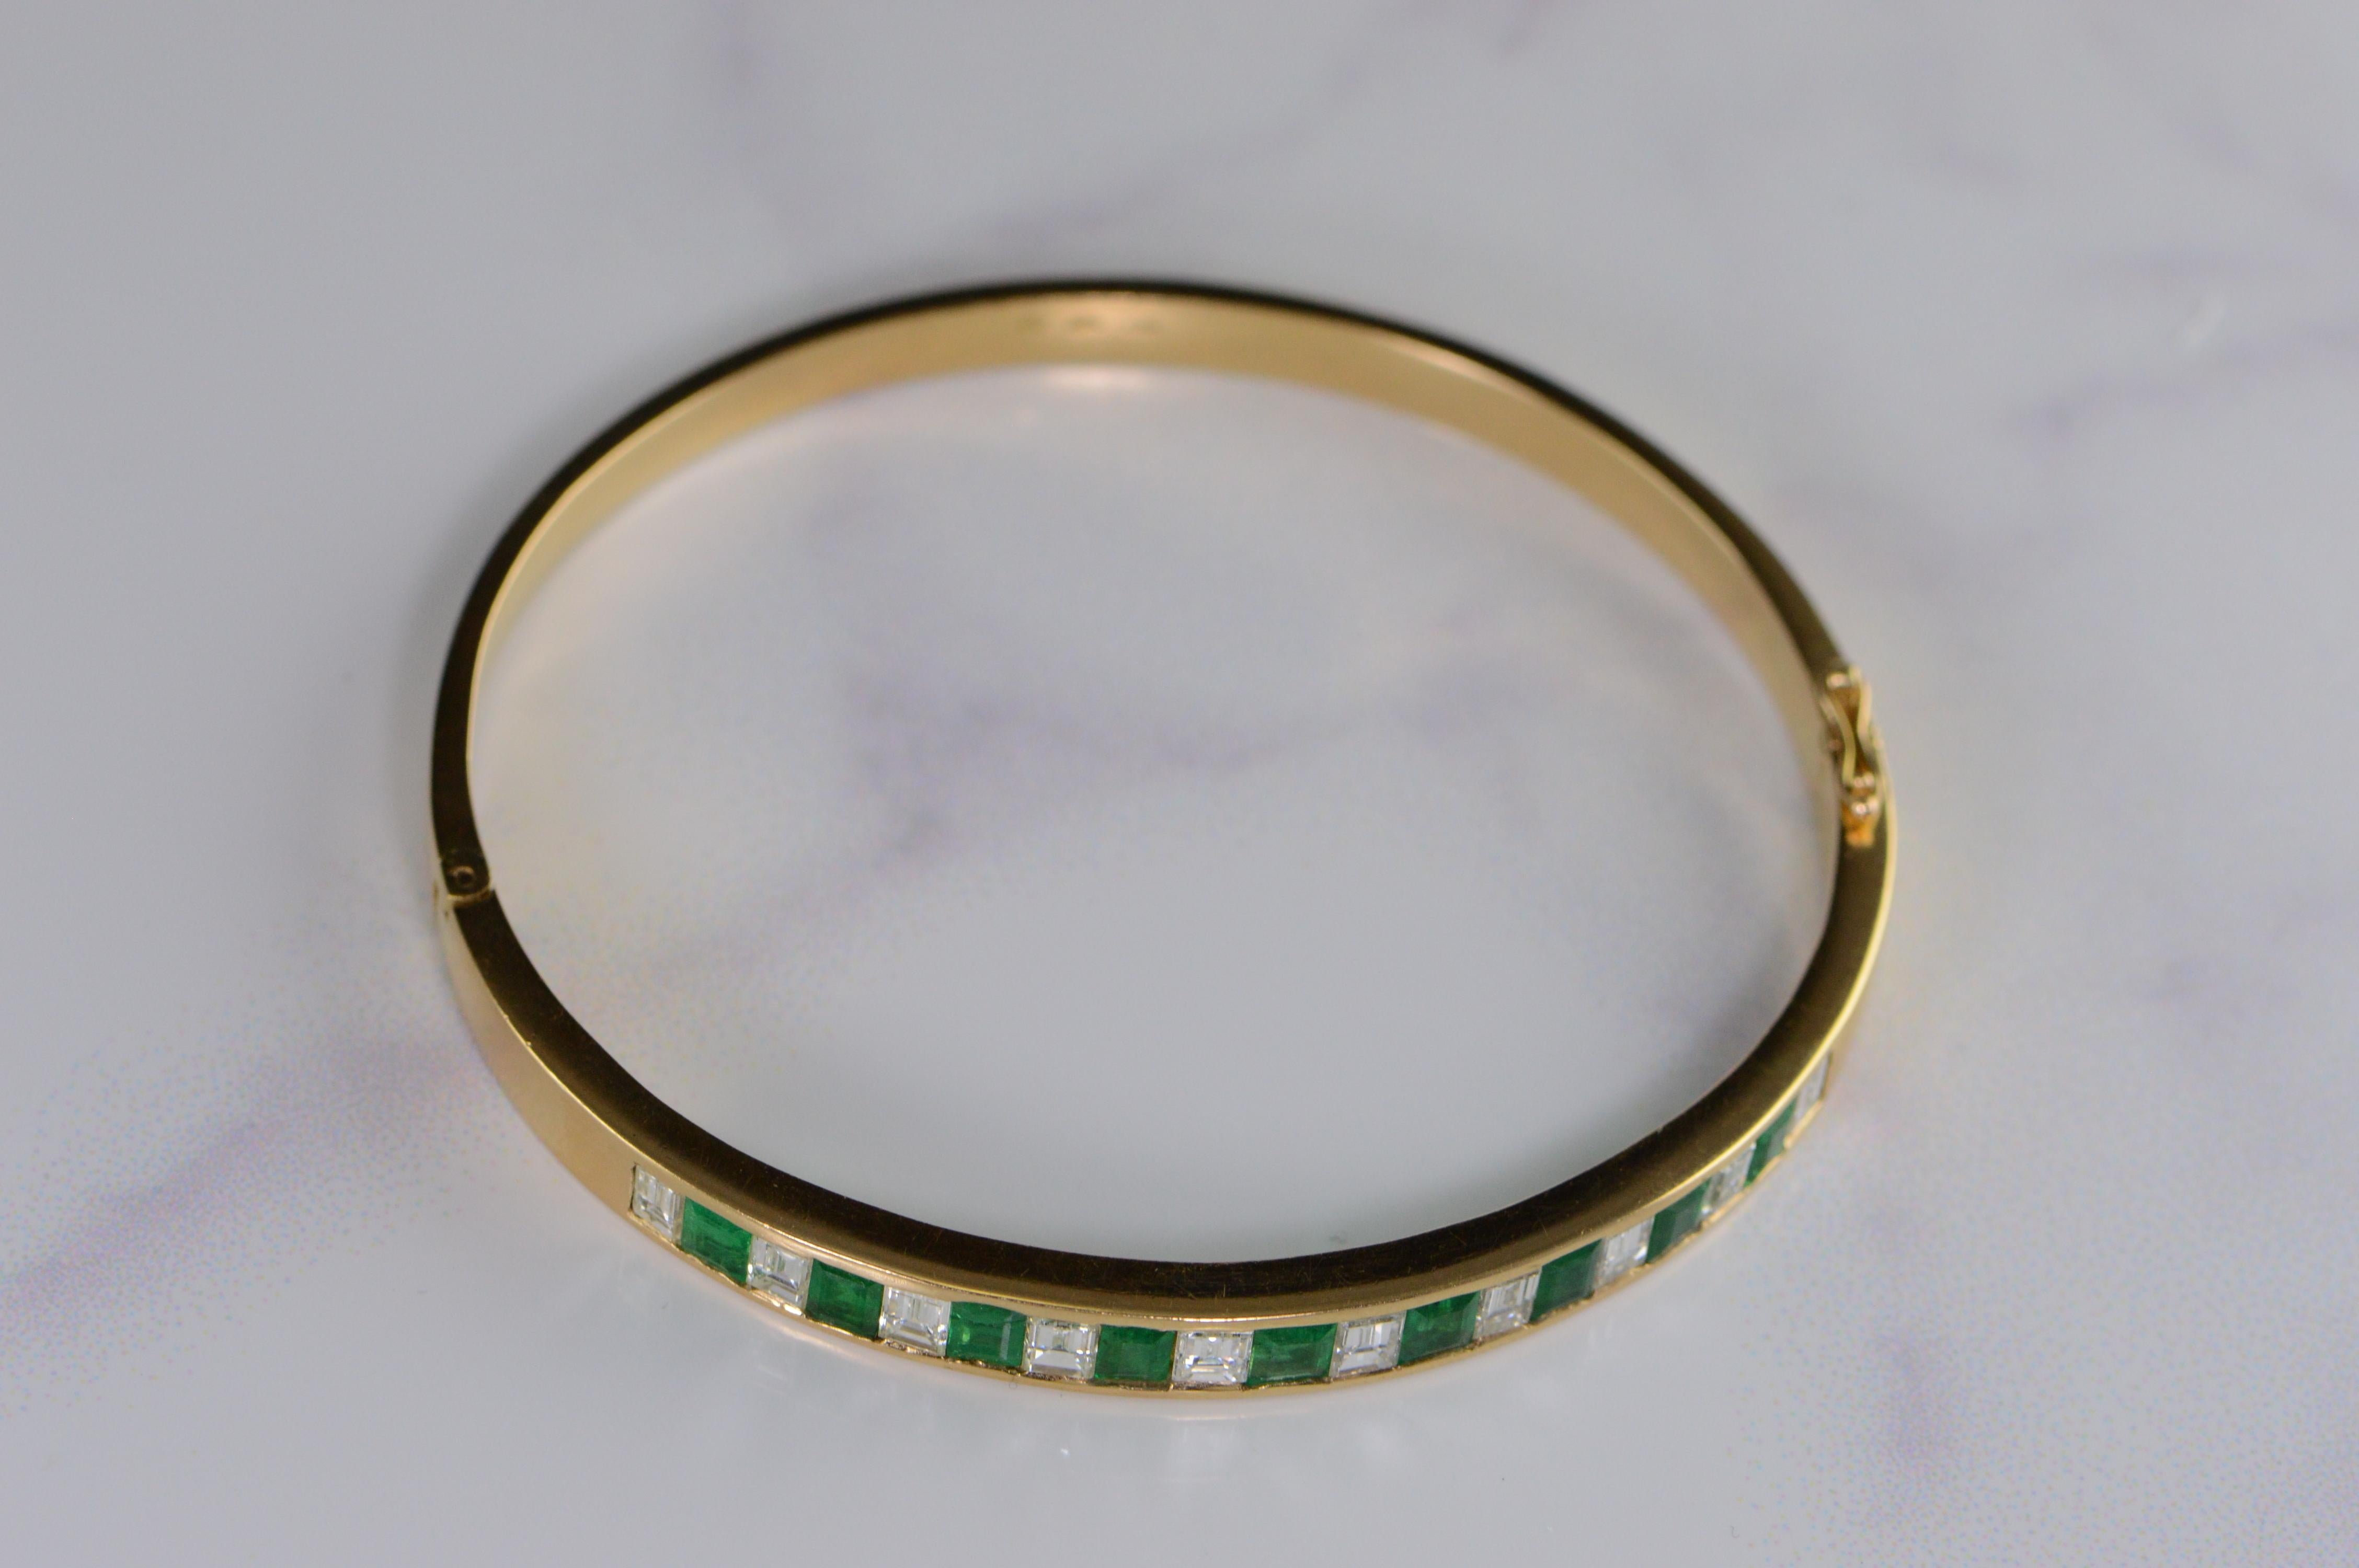 18 Karat 3.60 Carat Emerald Diamond Bangle Hinged Bracelet Yellow Gold In Excellent Condition For Sale In Frederick, MD